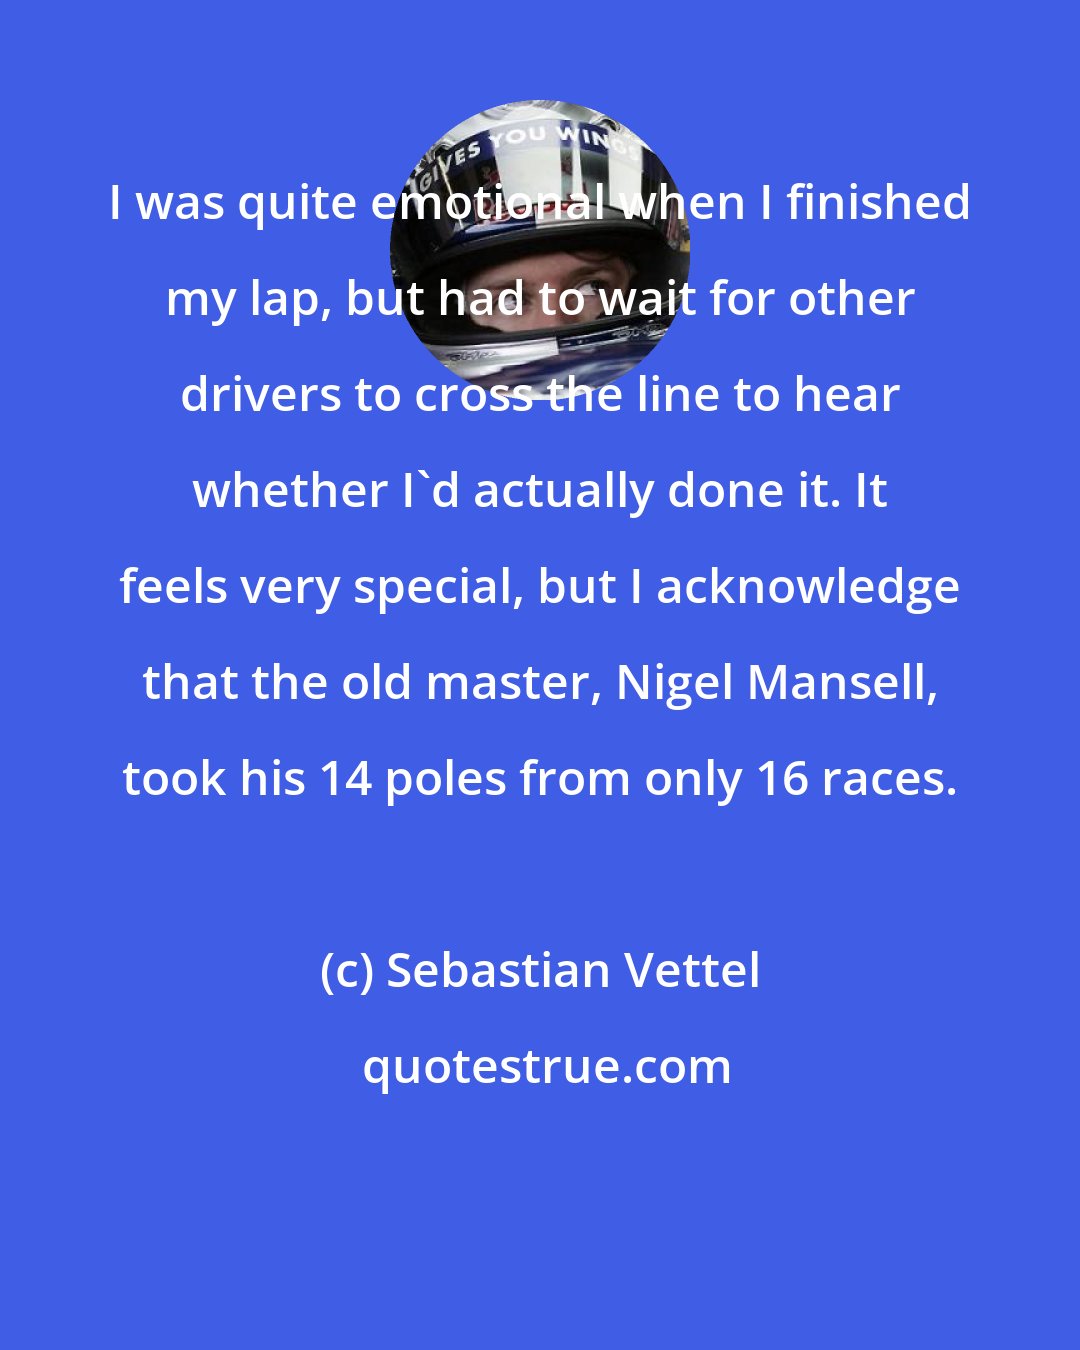 Sebastian Vettel: I was quite emotional when I finished my lap, but had to wait for other drivers to cross the line to hear whether I'd actually done it. It feels very special, but I acknowledge that the old master, Nigel Mansell, took his 14 poles from only 16 races.